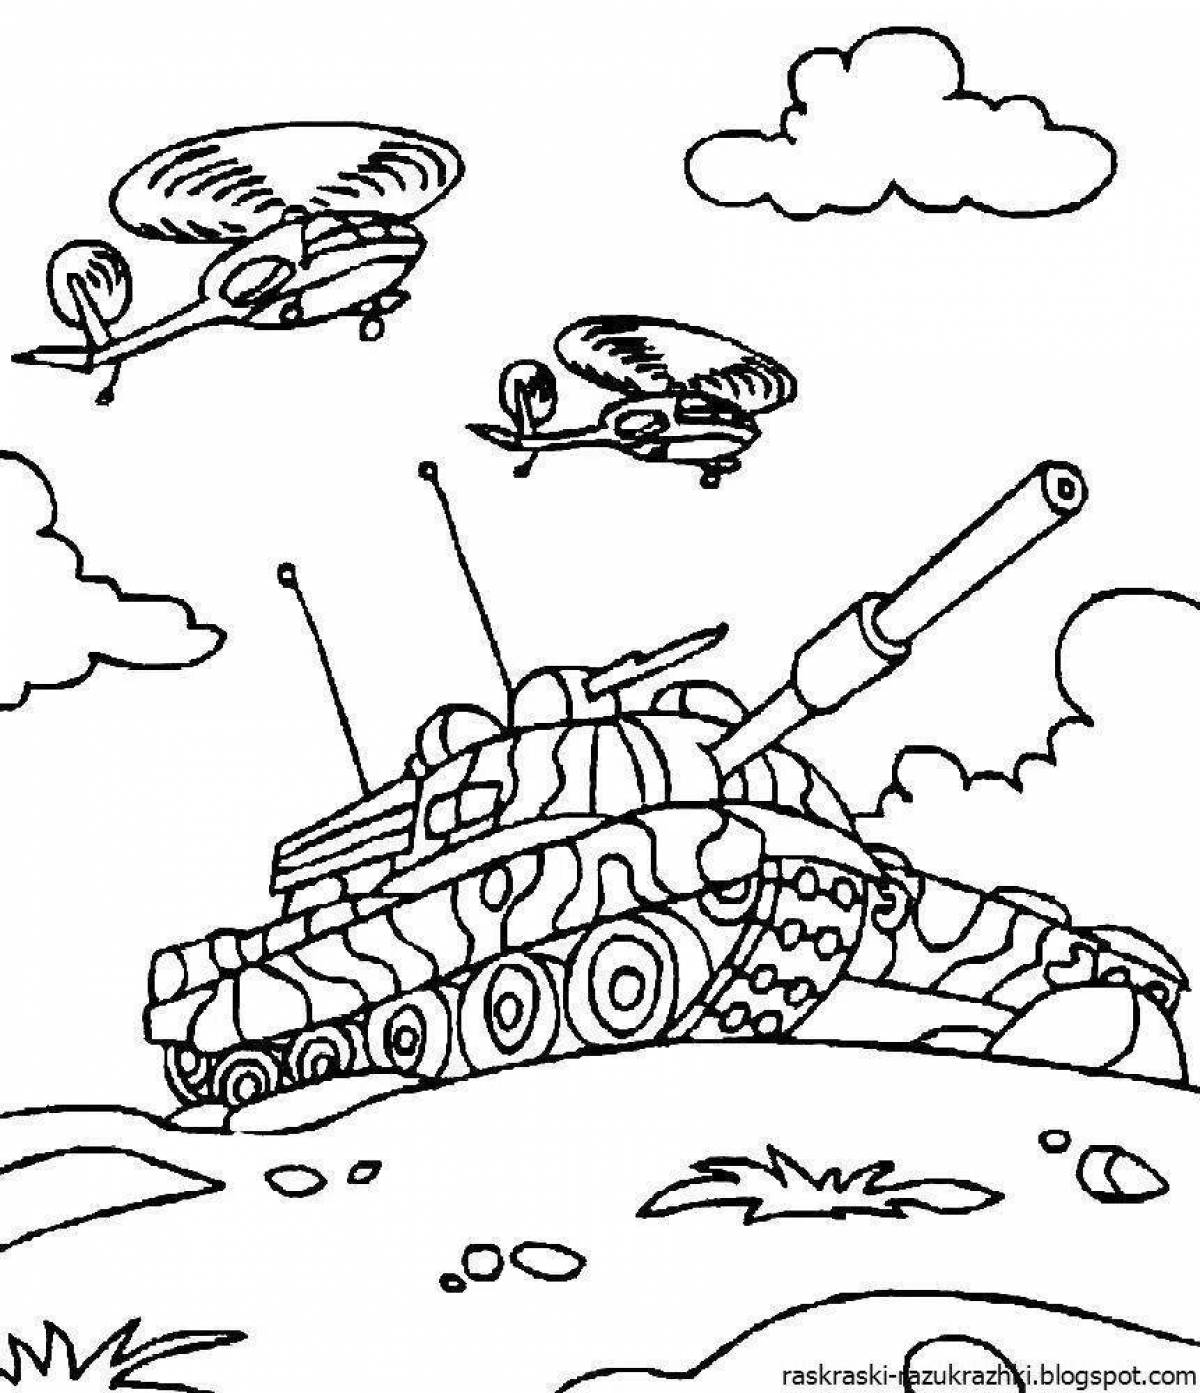 Monumental Coloring Book for Boys: War